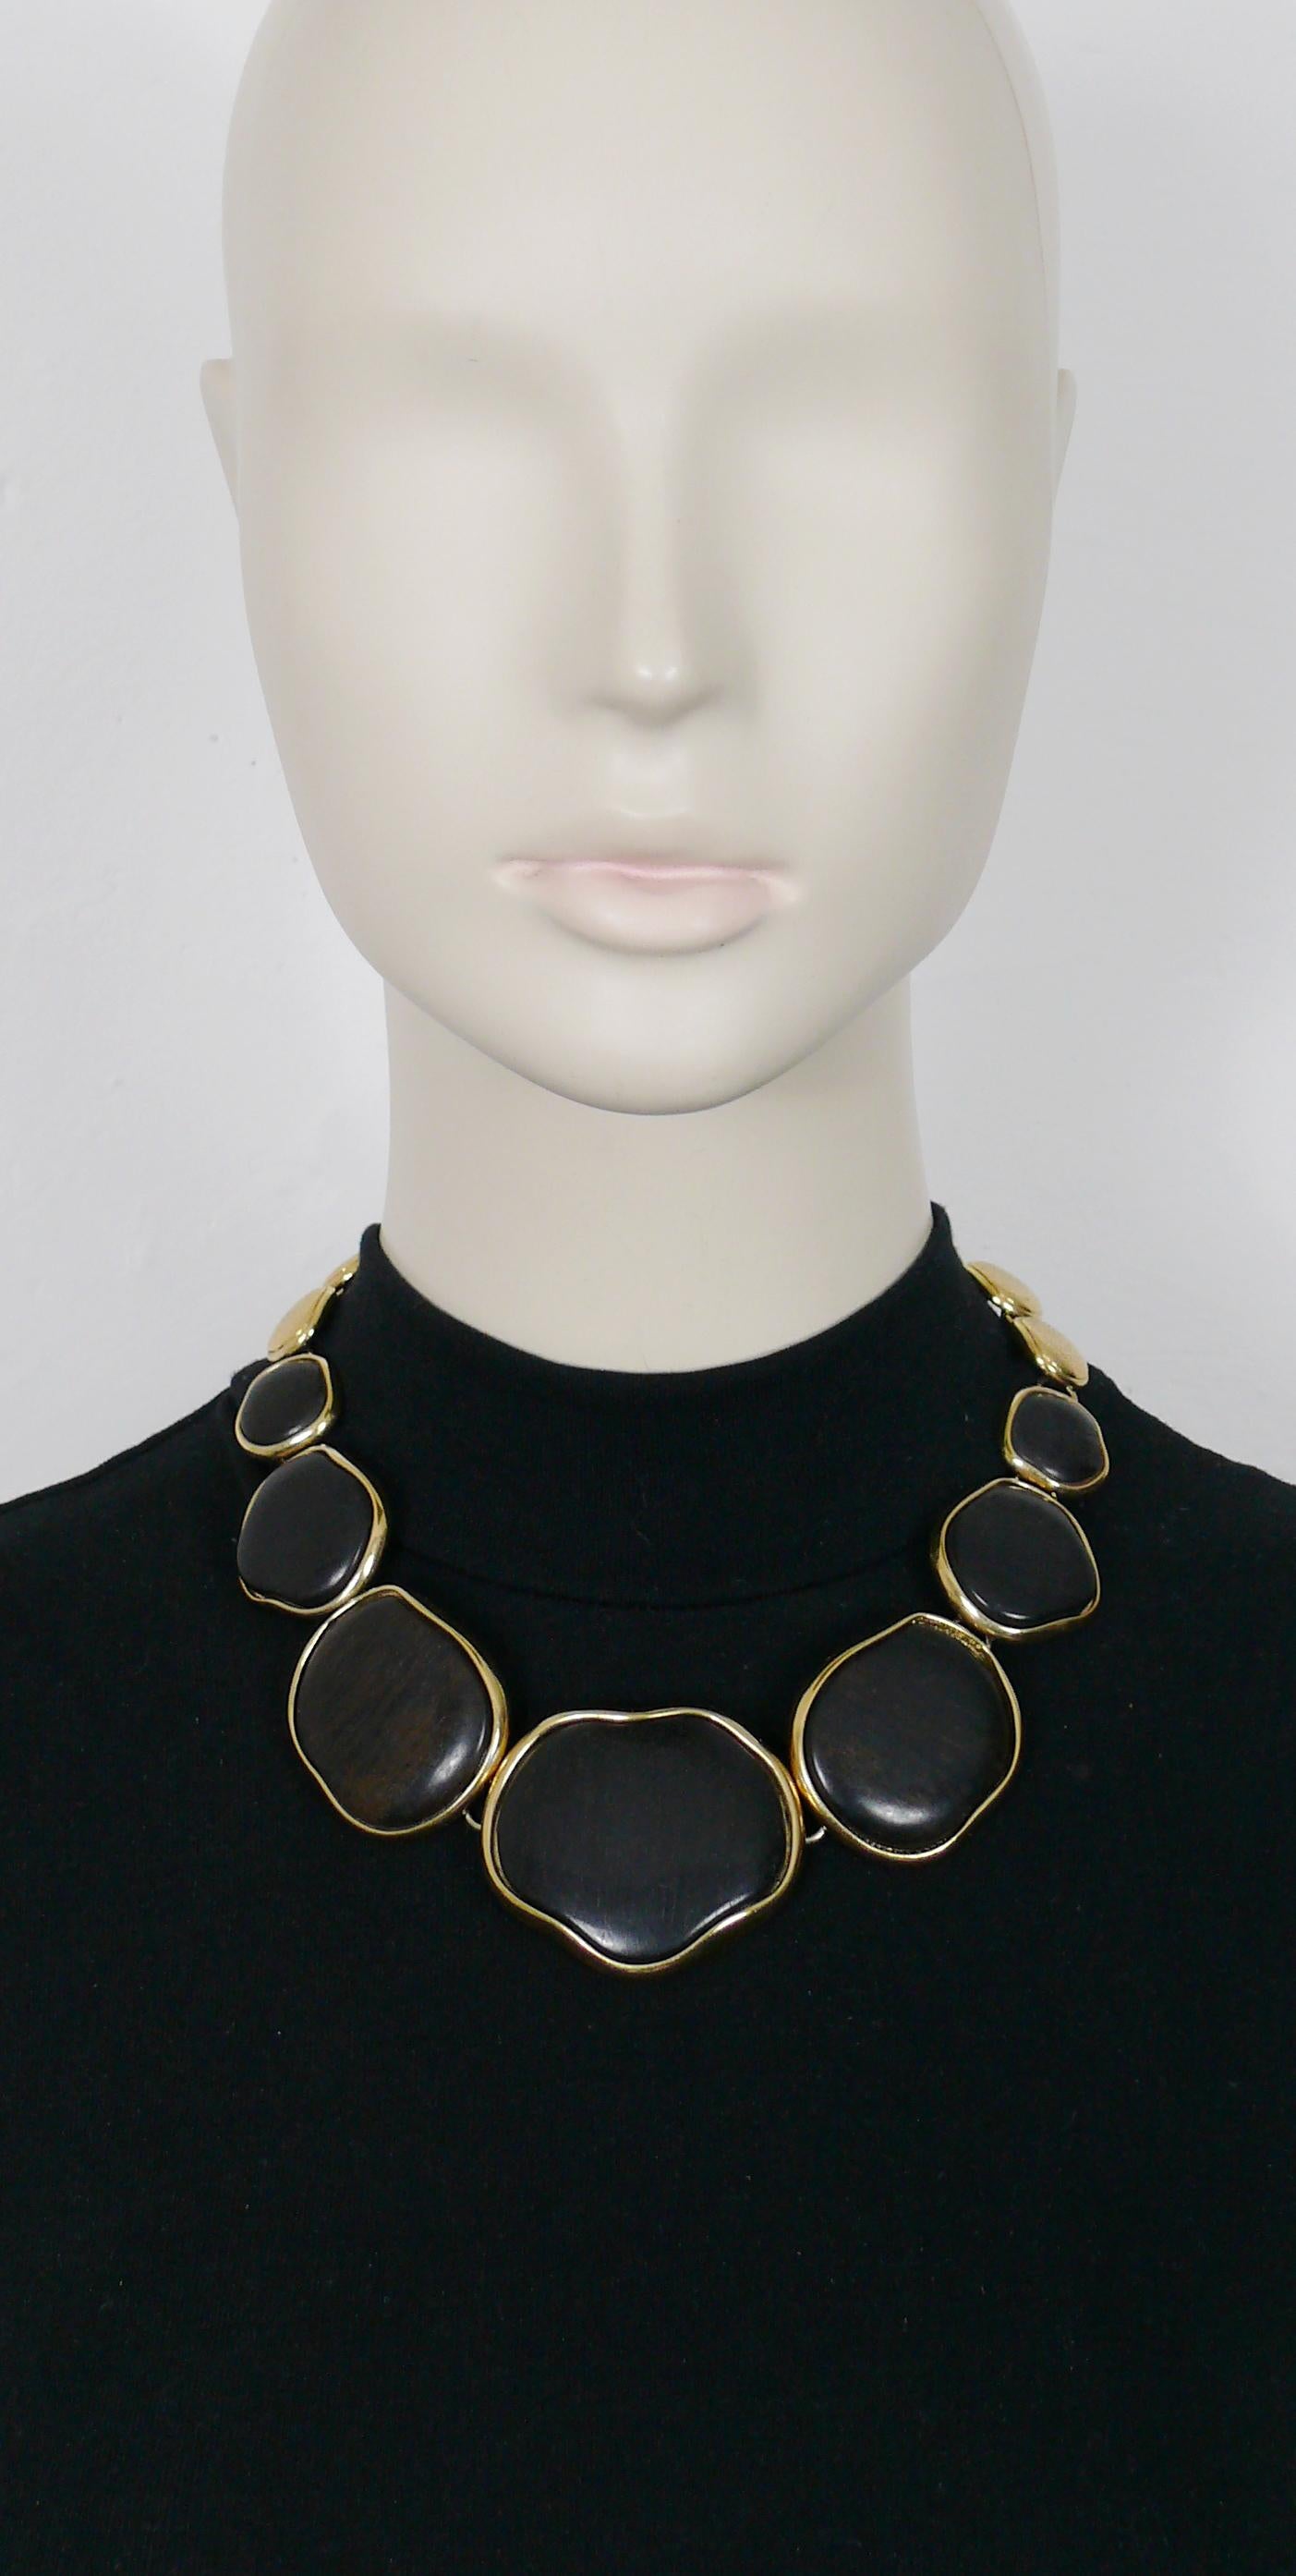 YVES SAINT LAURENT vintage choker necklace featuring irregular shaped graduated wood and gold toned metal discs.

Adjustable S hook closure.

Embossed YSL Made in France.

Indicative measurements : adjustable length from approx. 41 cm (16.14 inches)